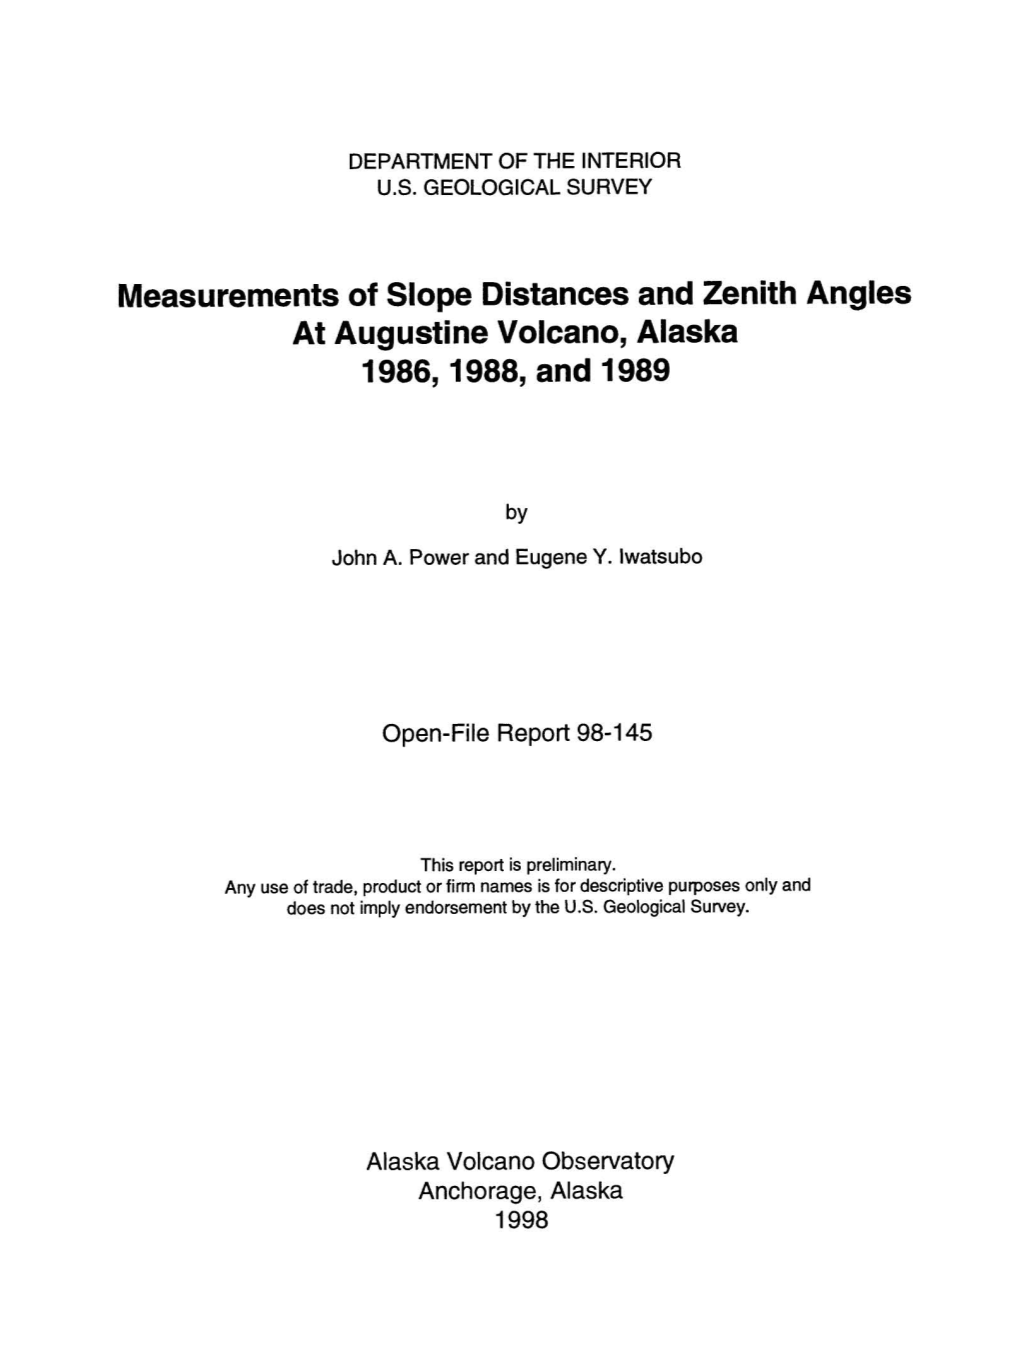 Measurements of Slope Distances and Zenith Angles at Augustine Volcano, Alaska 1986,1988, and 1989